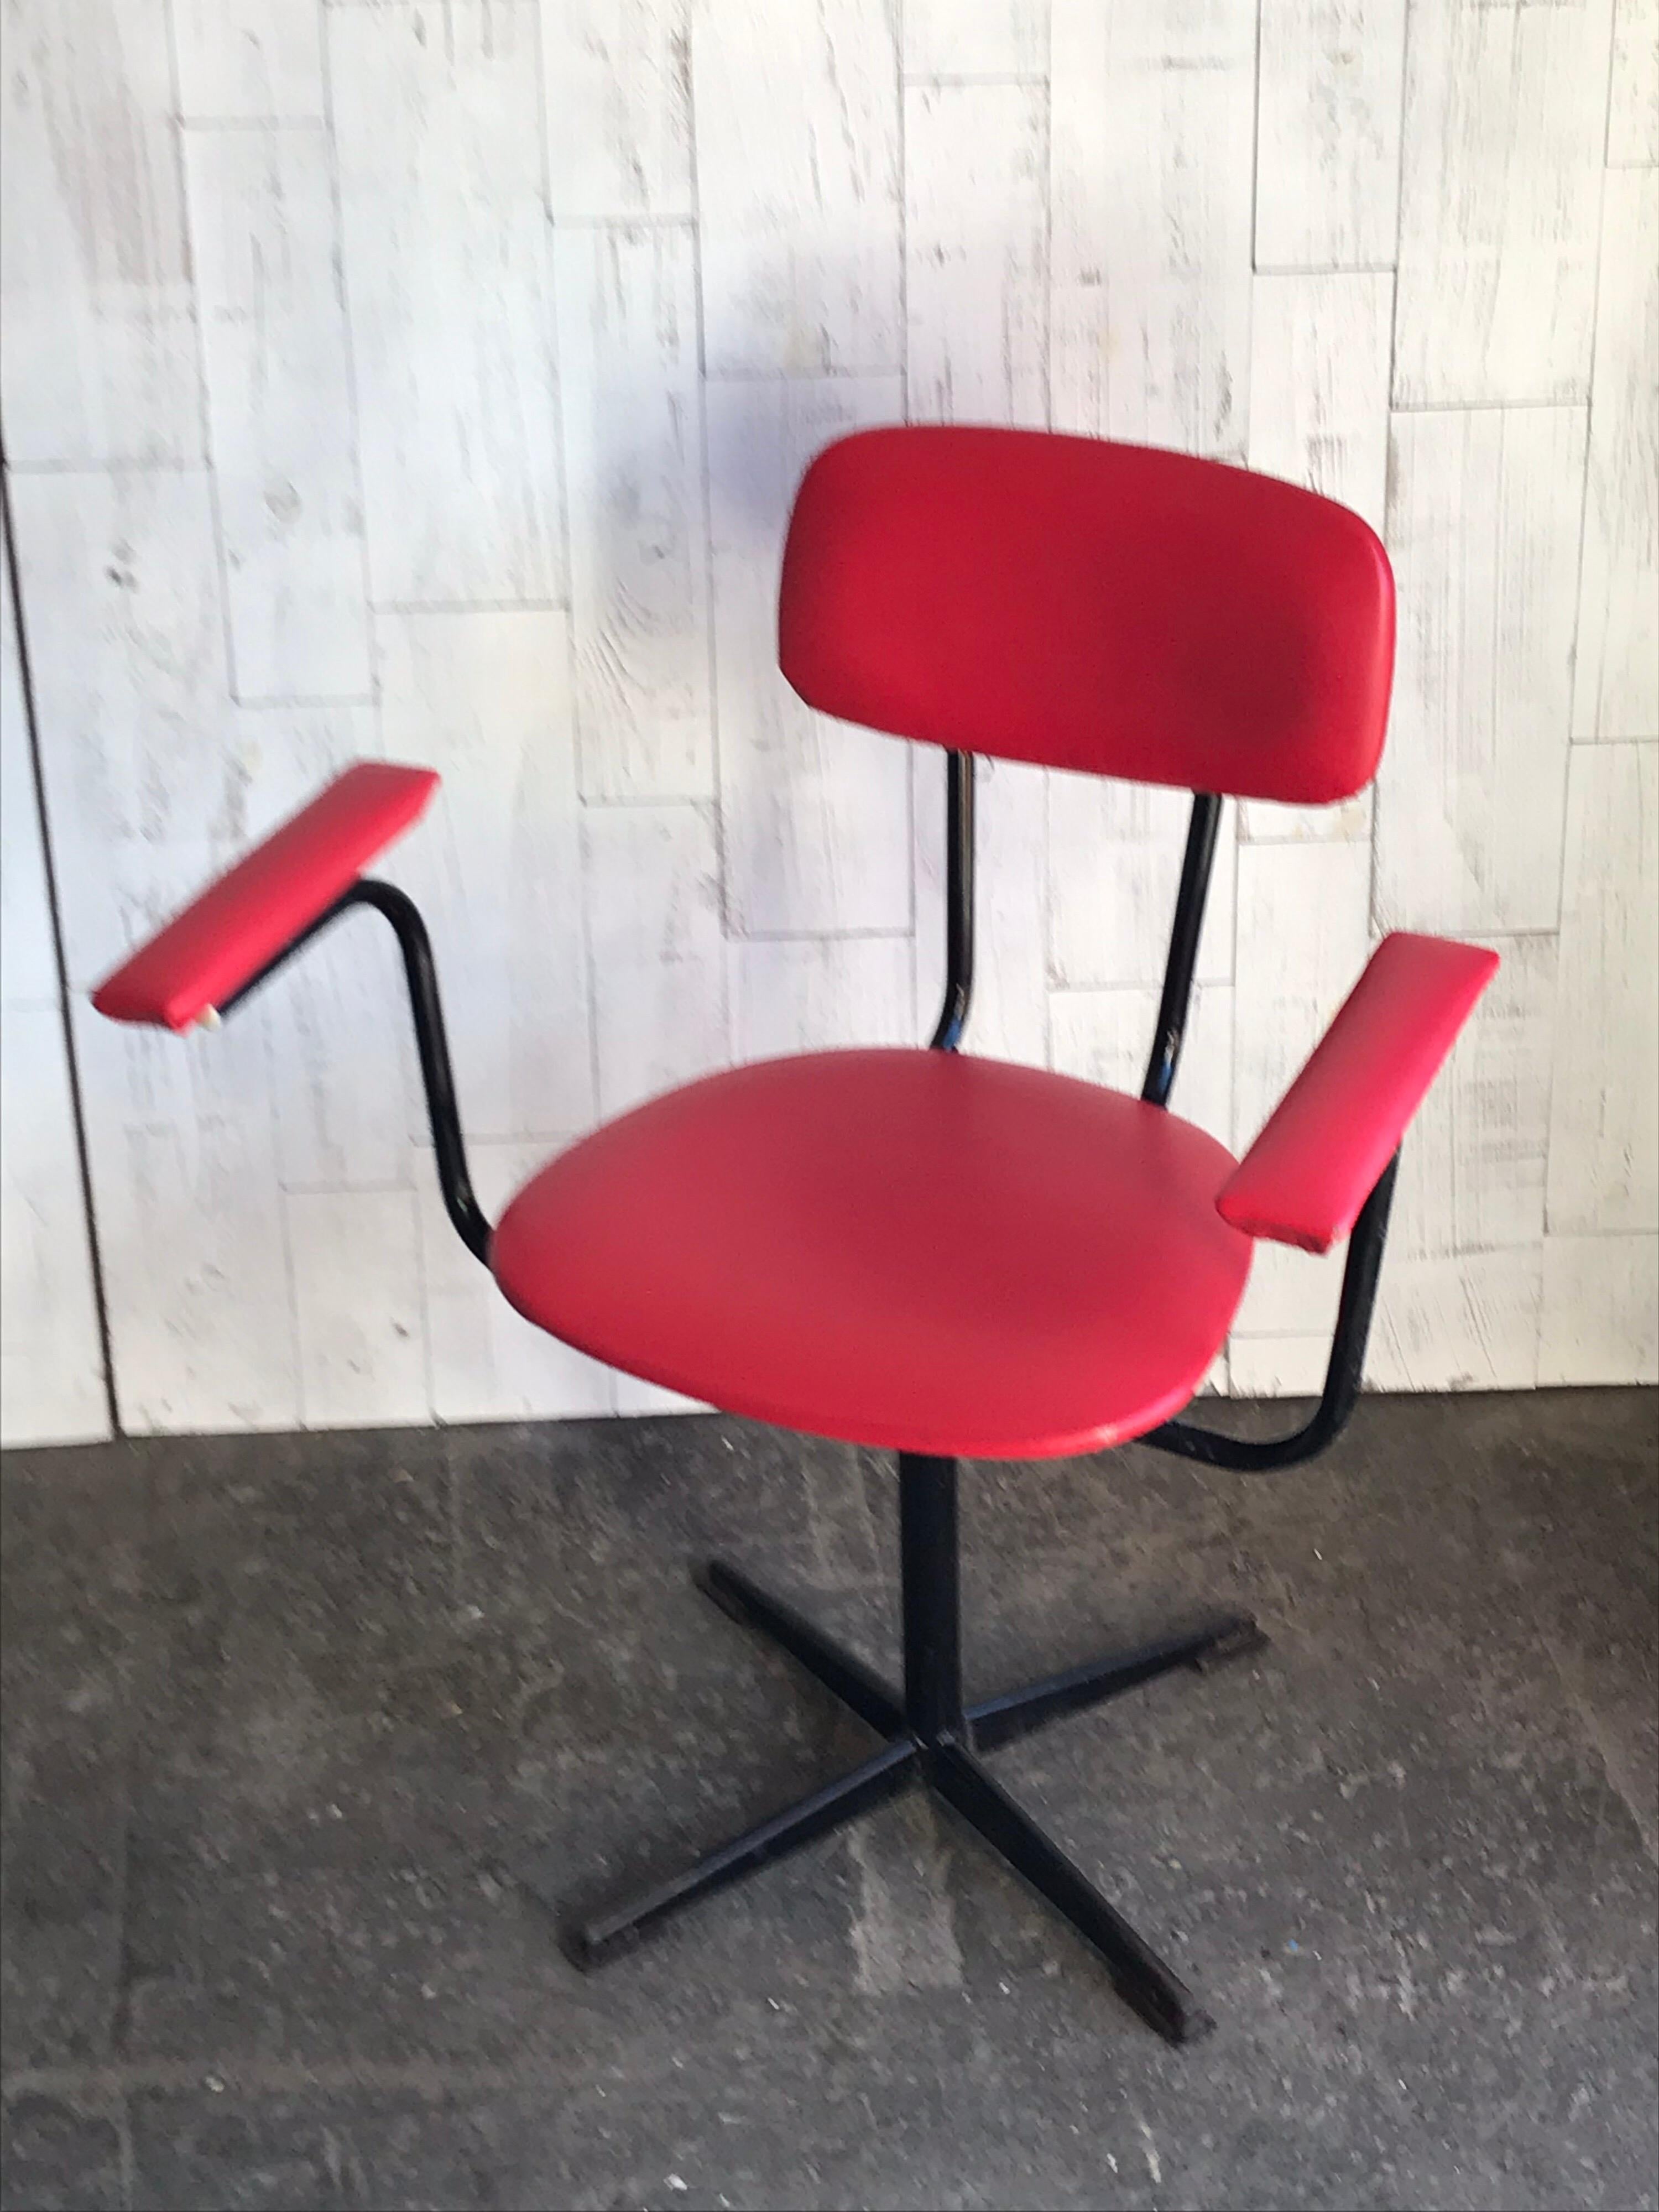 Mid-20th Century Retro Chair from Hungary, circa 1960s For Sale